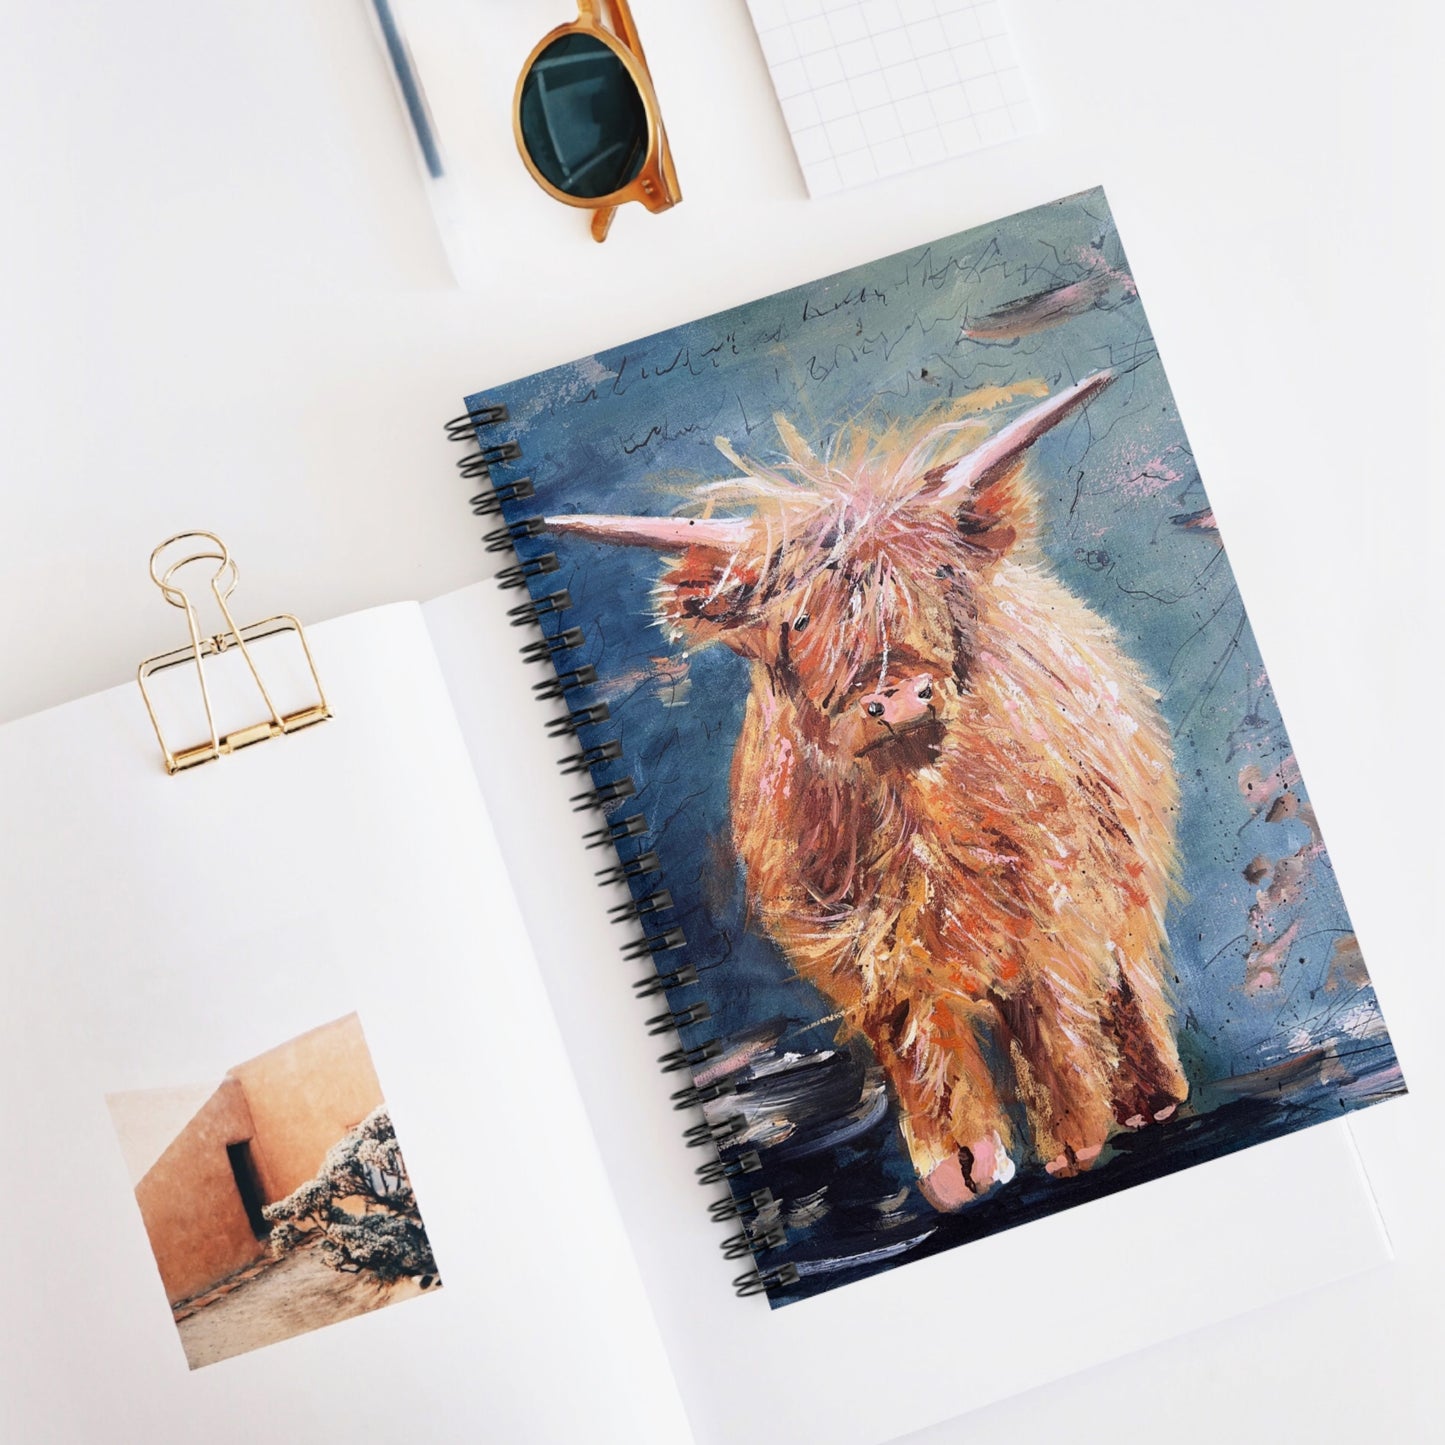 Highland Cow Print on Spiral Notebook - Ruled Line